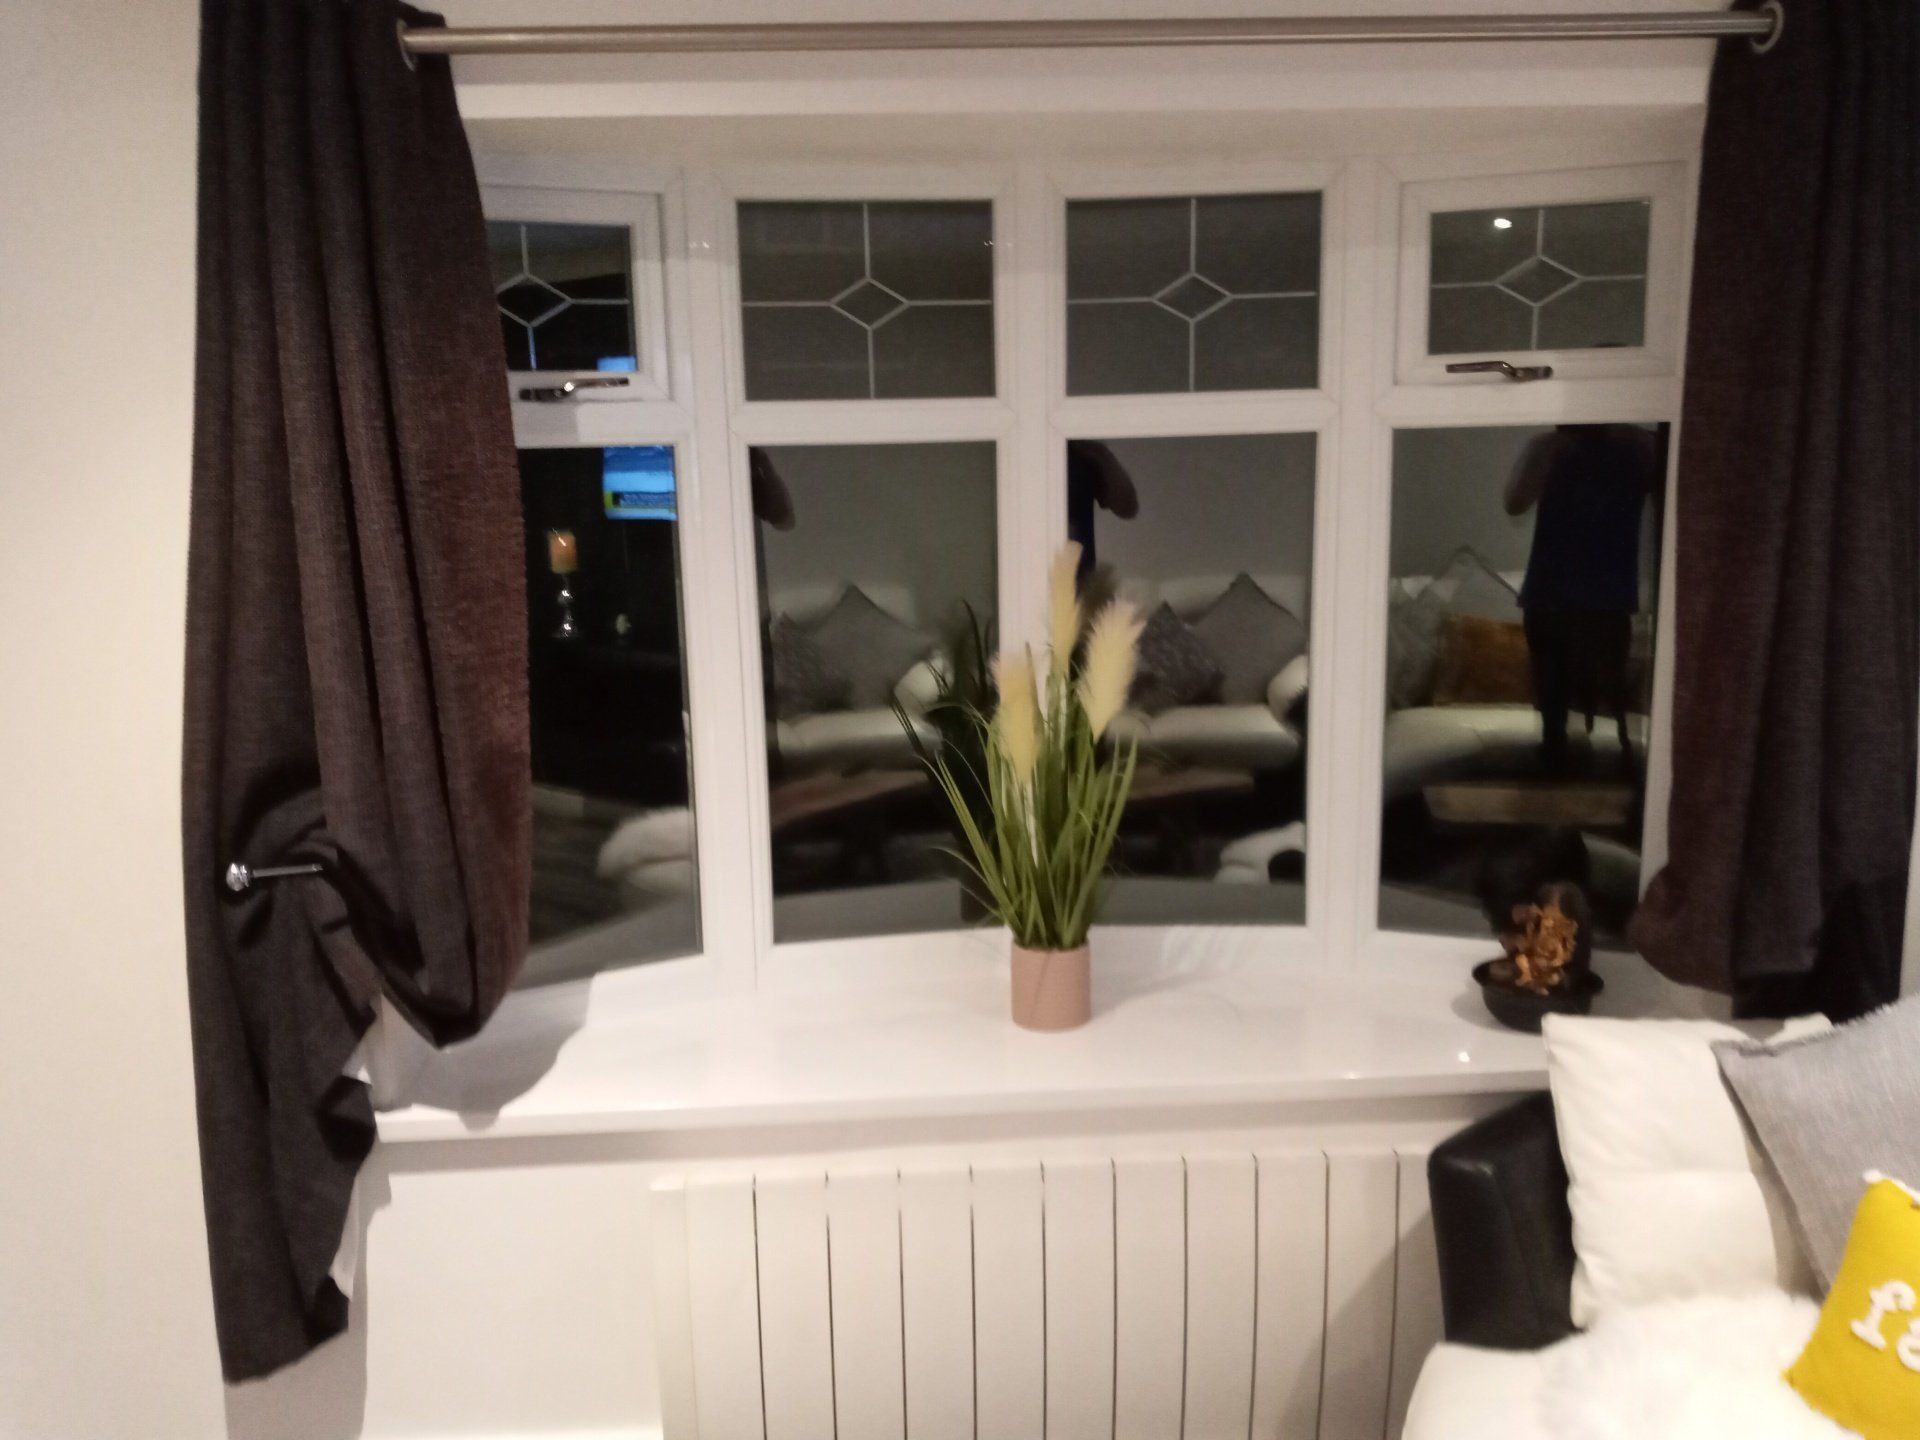 Bow windows, bay windows, bay window conversion, bay window glass replacement, glass replacement for bay windows, bow window glass, glass fitters near m, glass fitters Leeds , West Yorkshire